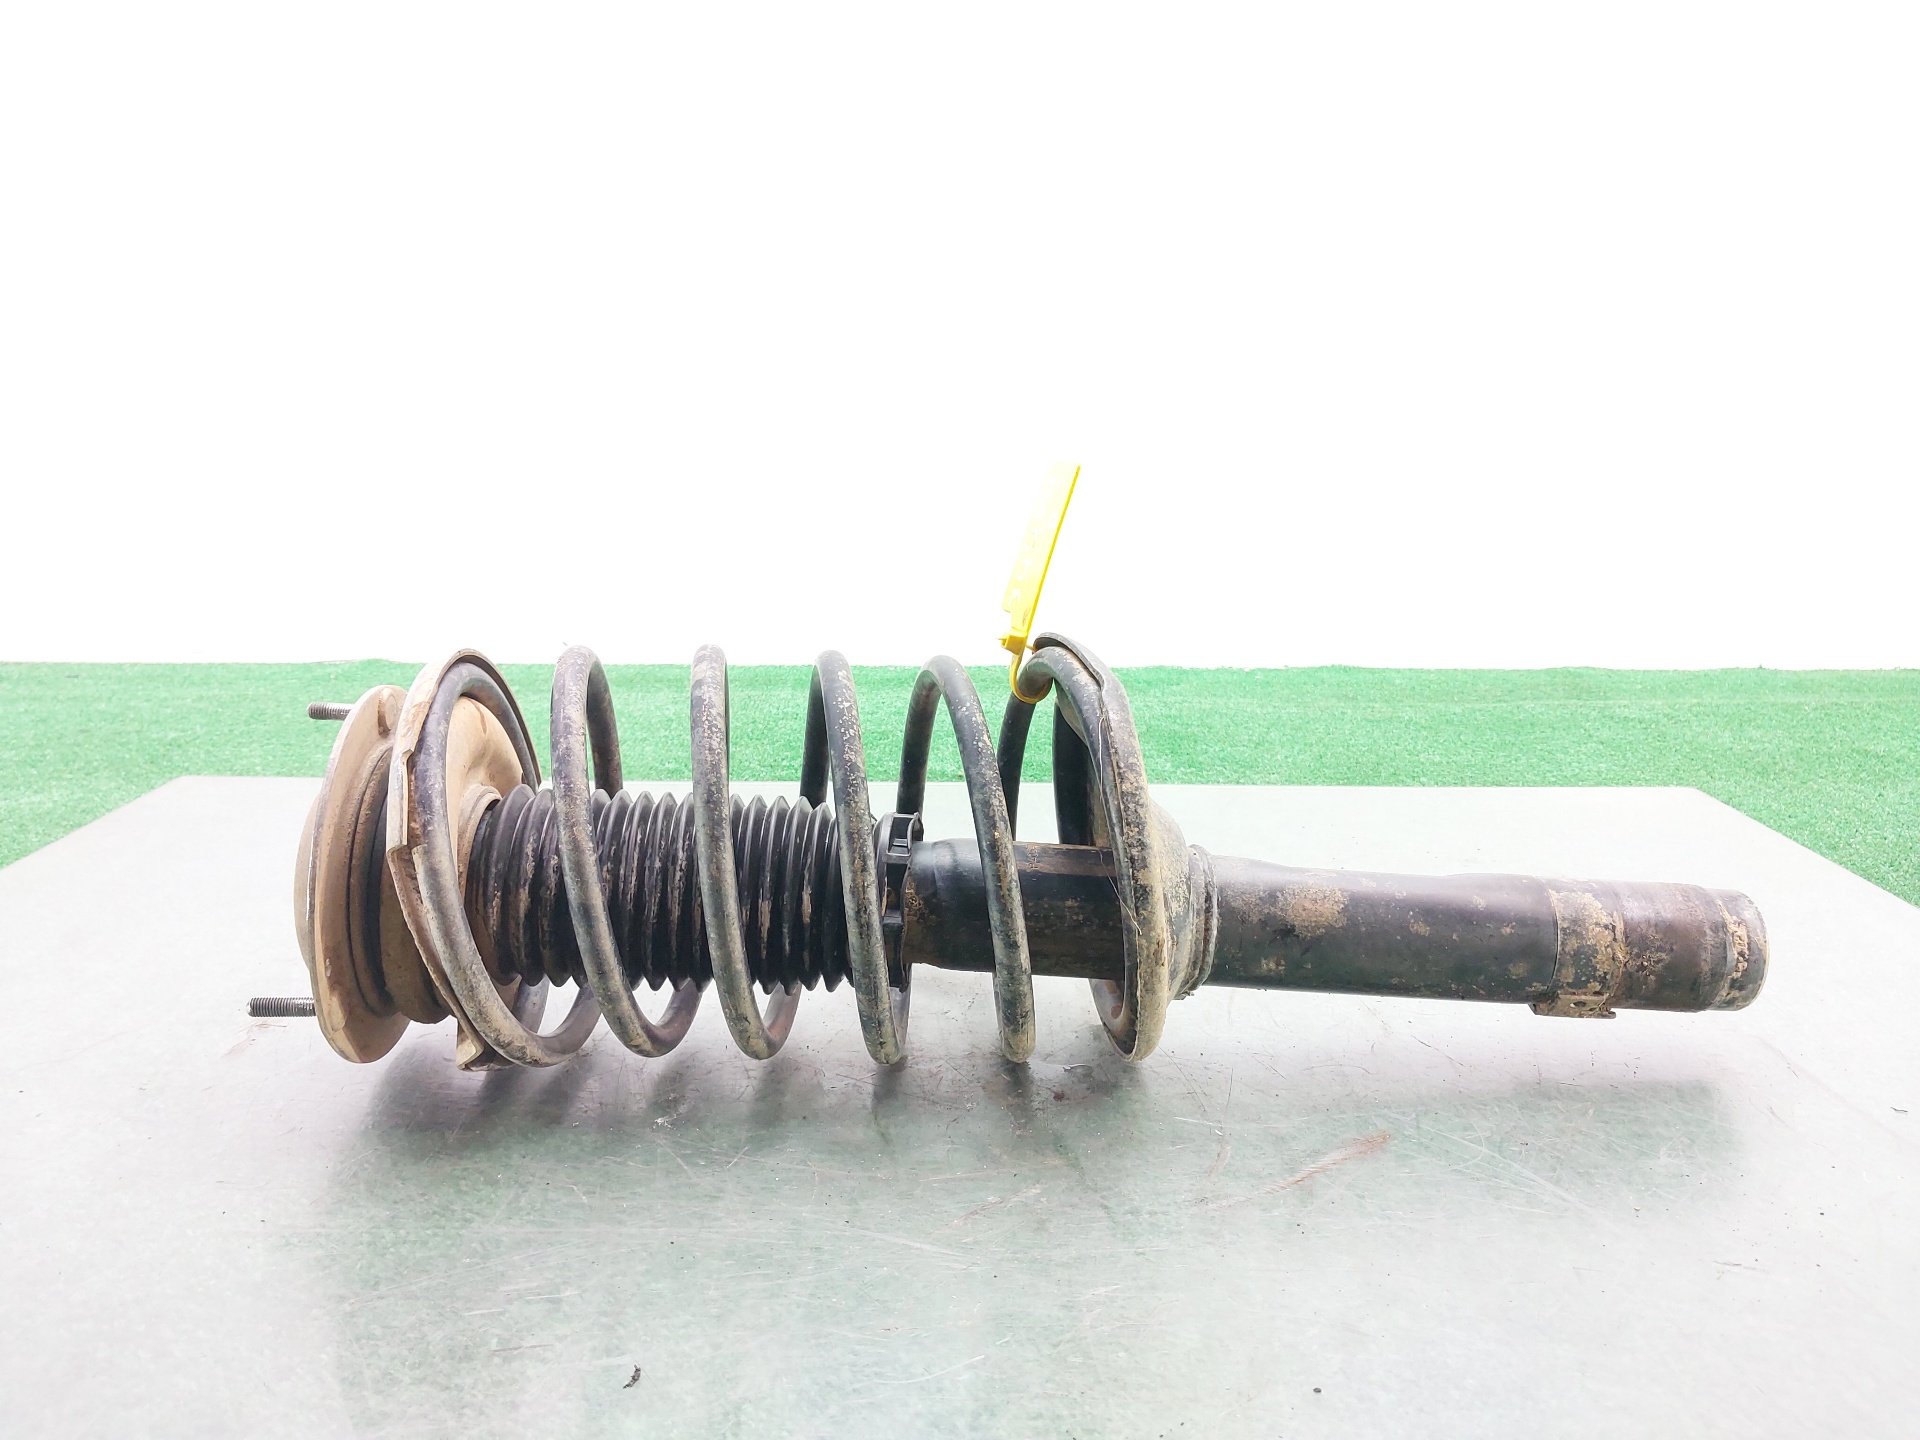 RENAULT C15 Front Right Shock Absorber 9455327880 25109130